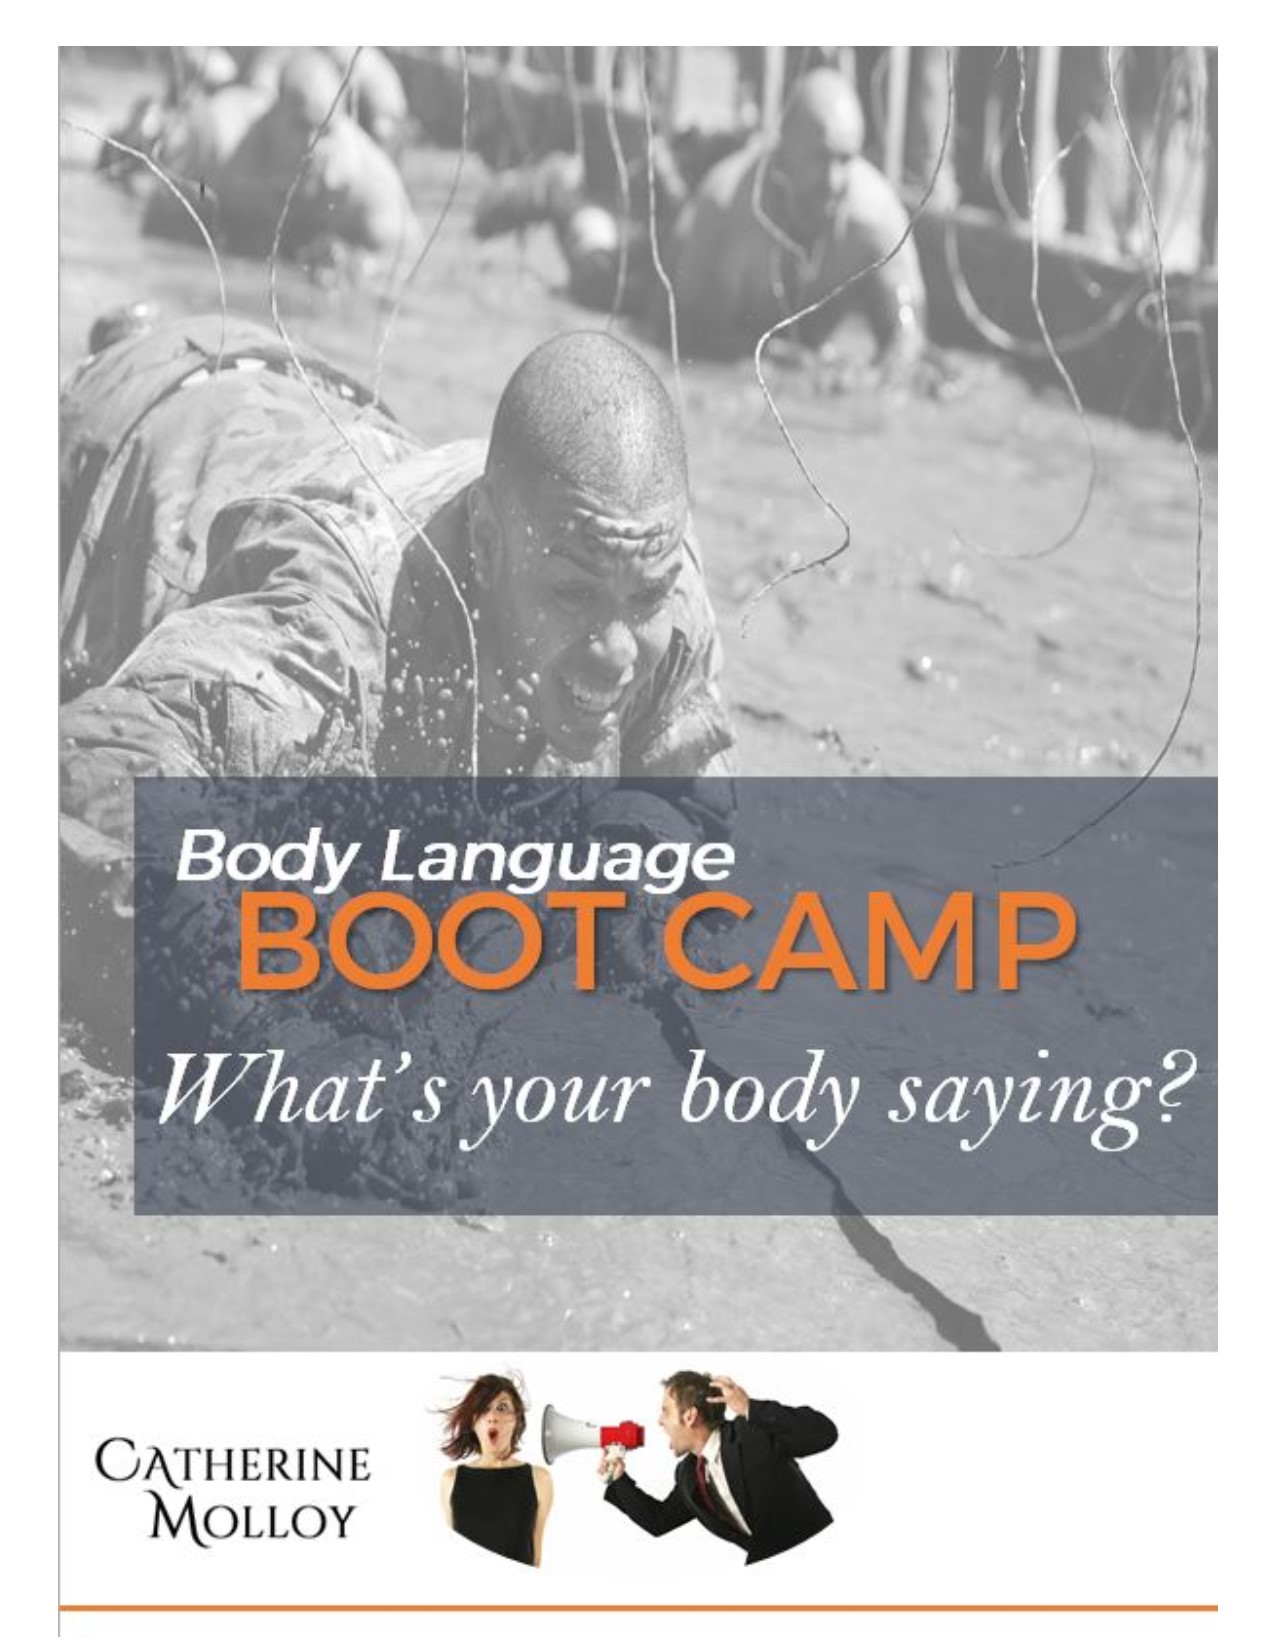 Body Language and Bootcamp – What is Your Body Saying?